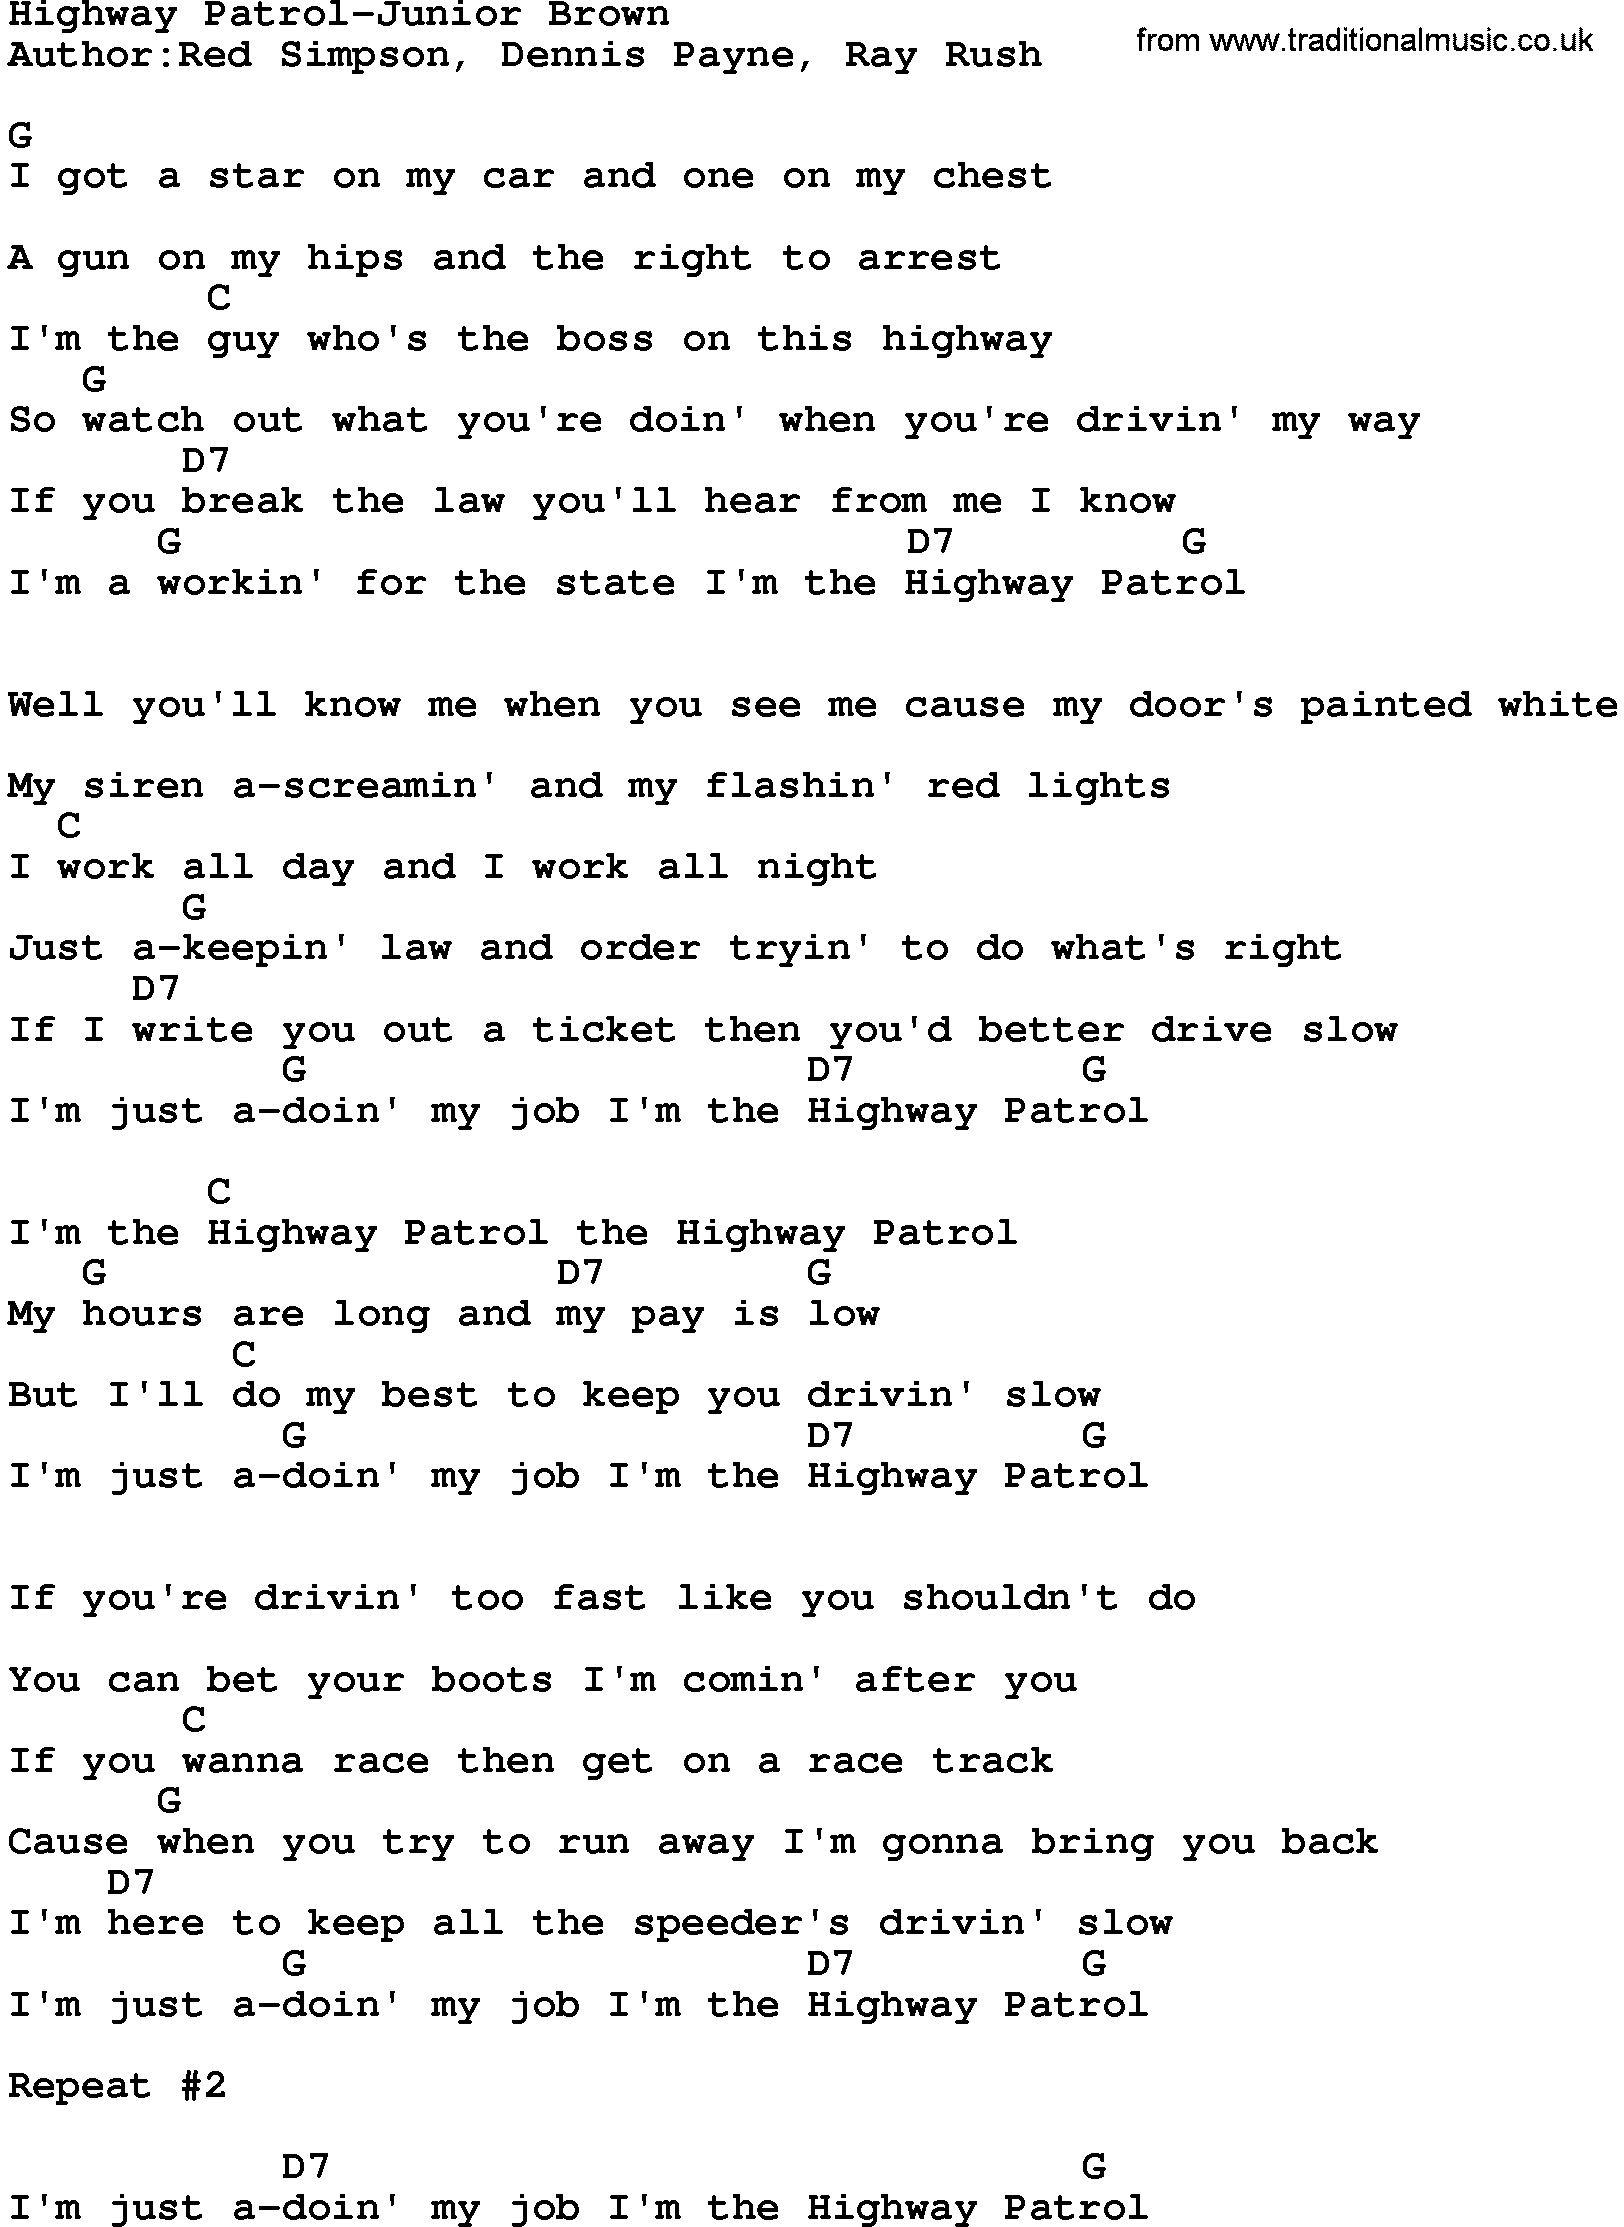 Country music song: Highway Patrol-Junior Brown lyrics and chords